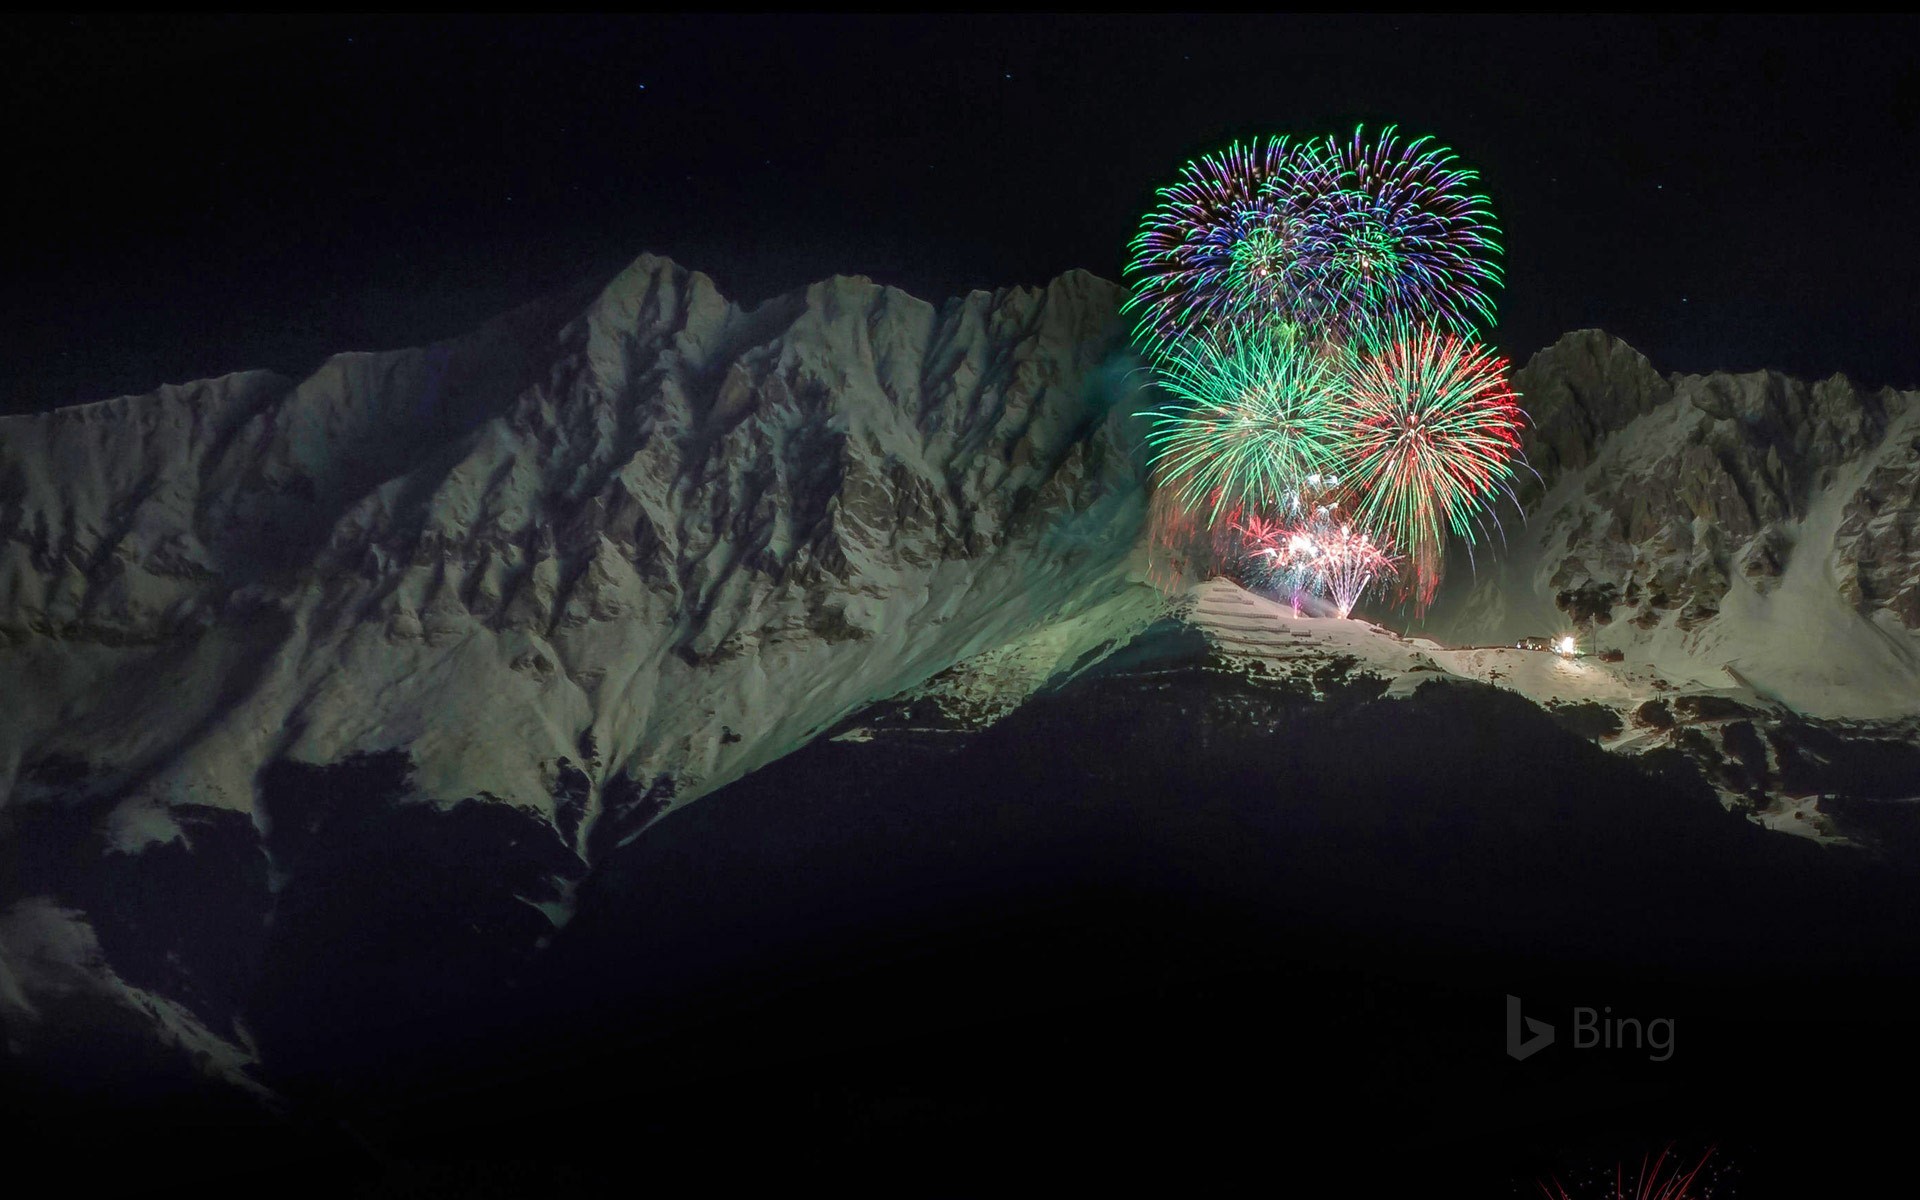 New Year’s Eve fireworks in the Nordkette mountain range, Austria